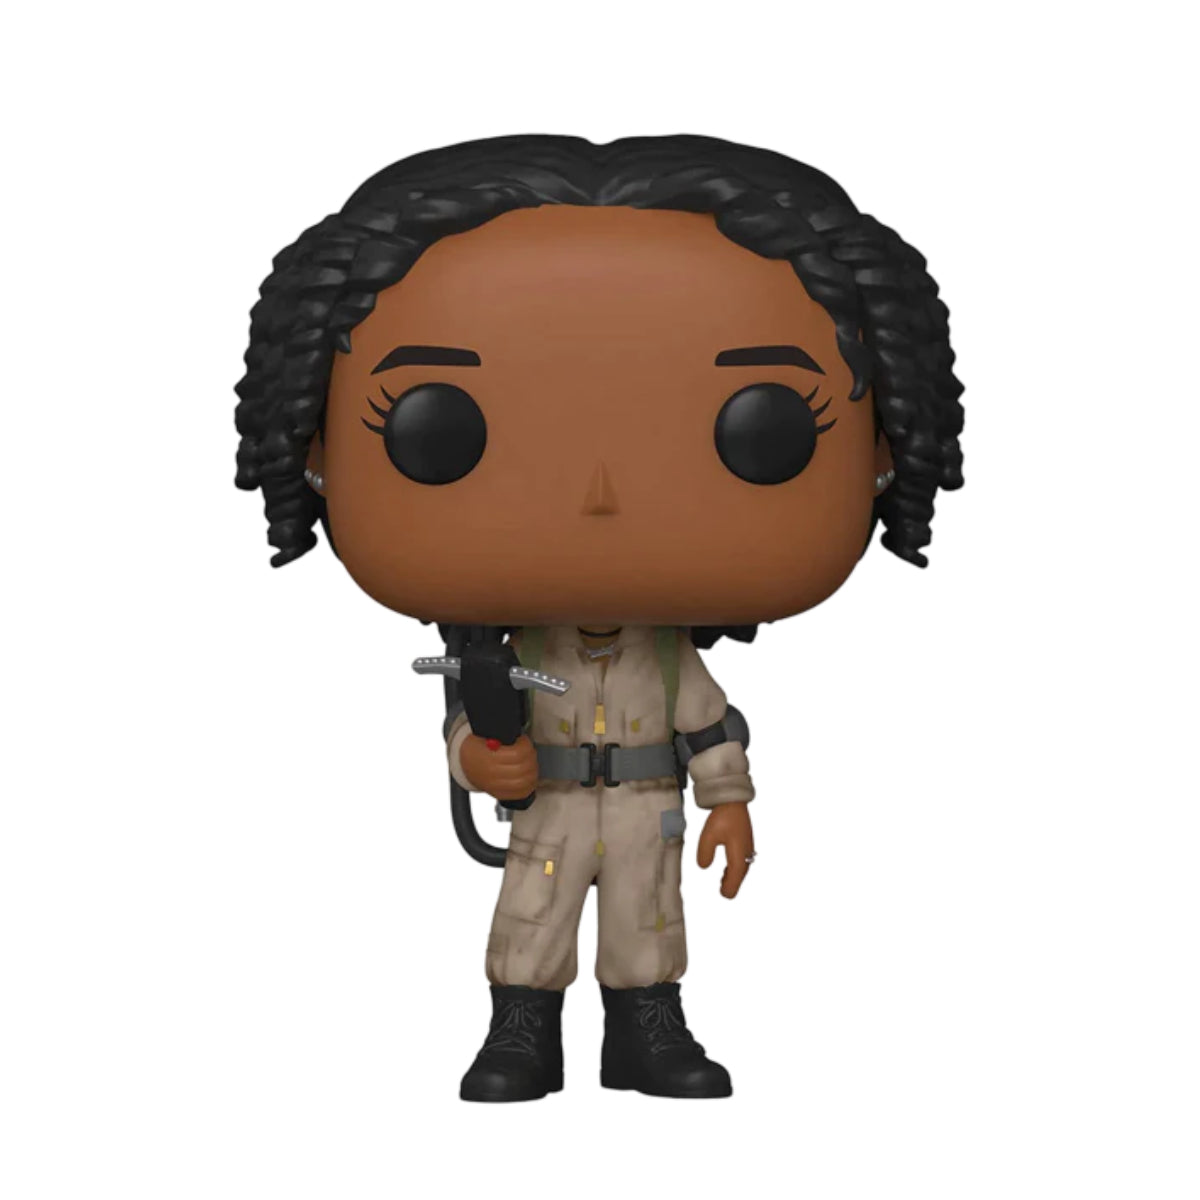 FUNKO POP MOVIES GHOSTBUSTERS AFTERLIFE LUCKY 926